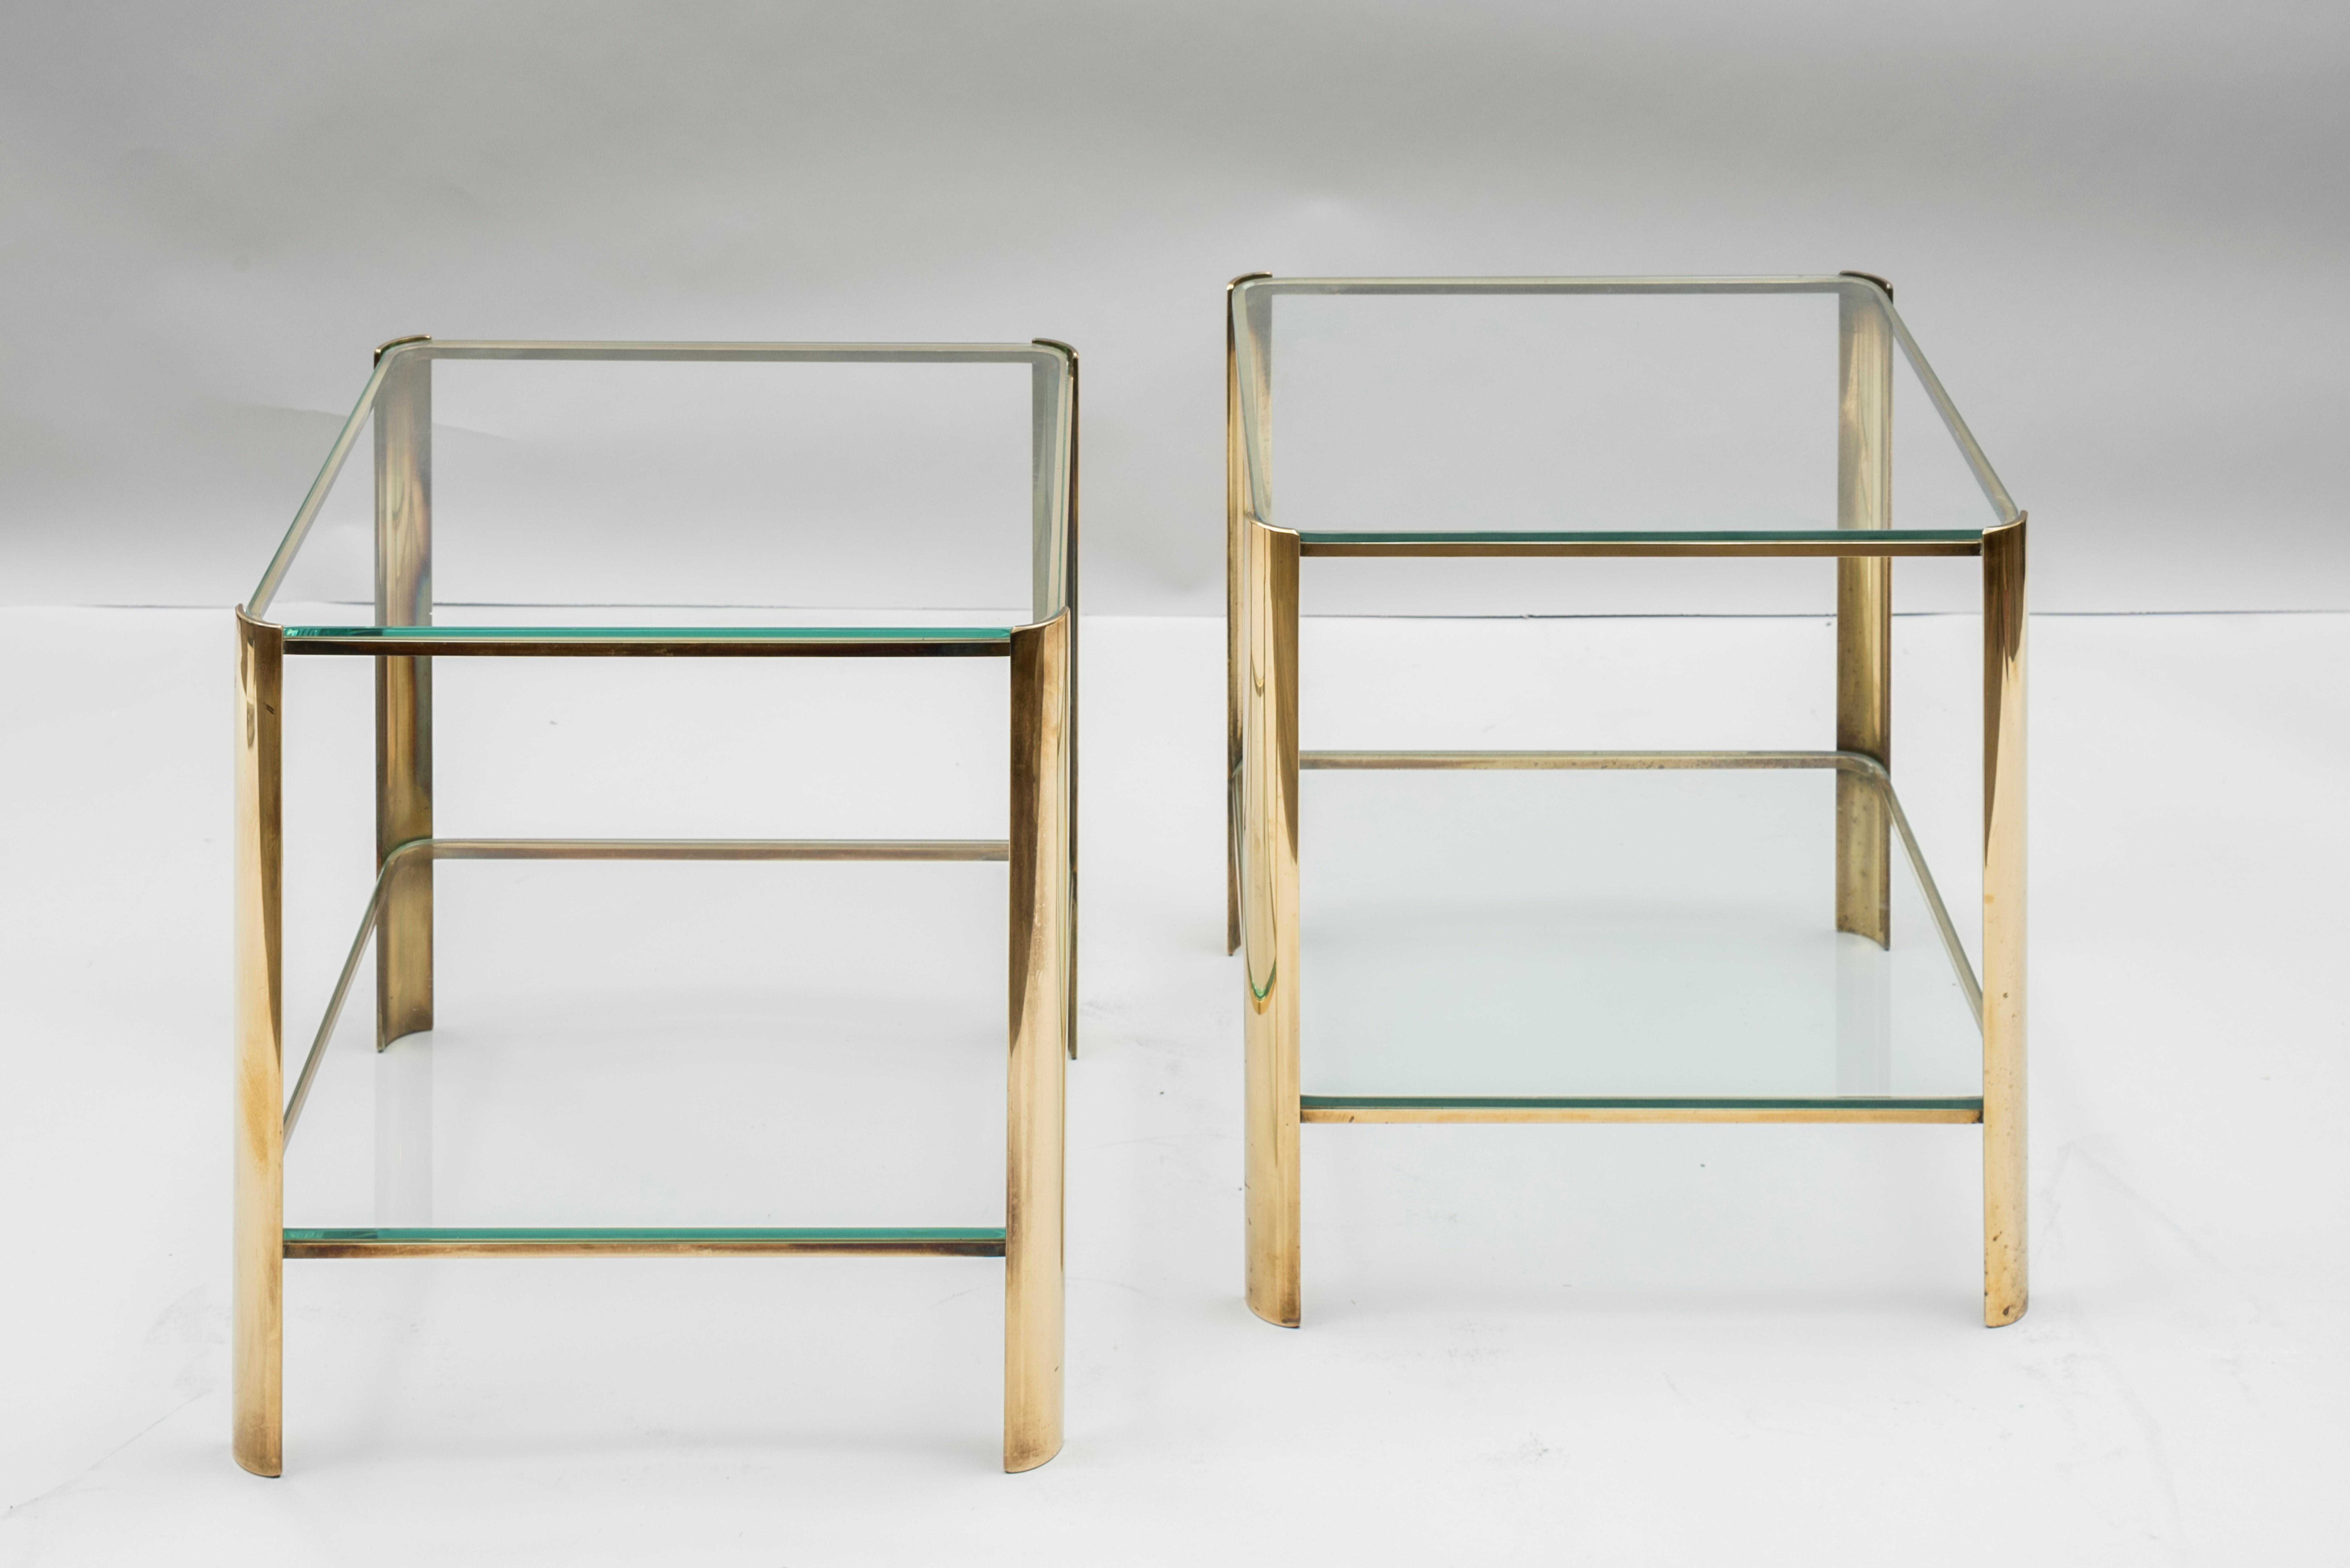 A pair of square tables, two tiers.
Glass tops 
Bronze feet
Designed by Jacques Quinet for Maison Malabert
France, 1970s

Measures: 
Height 44 cm (17.3 in.)
Width 40 cm (15.7 in.)
Depth 40 cm (15.7 in.).
  